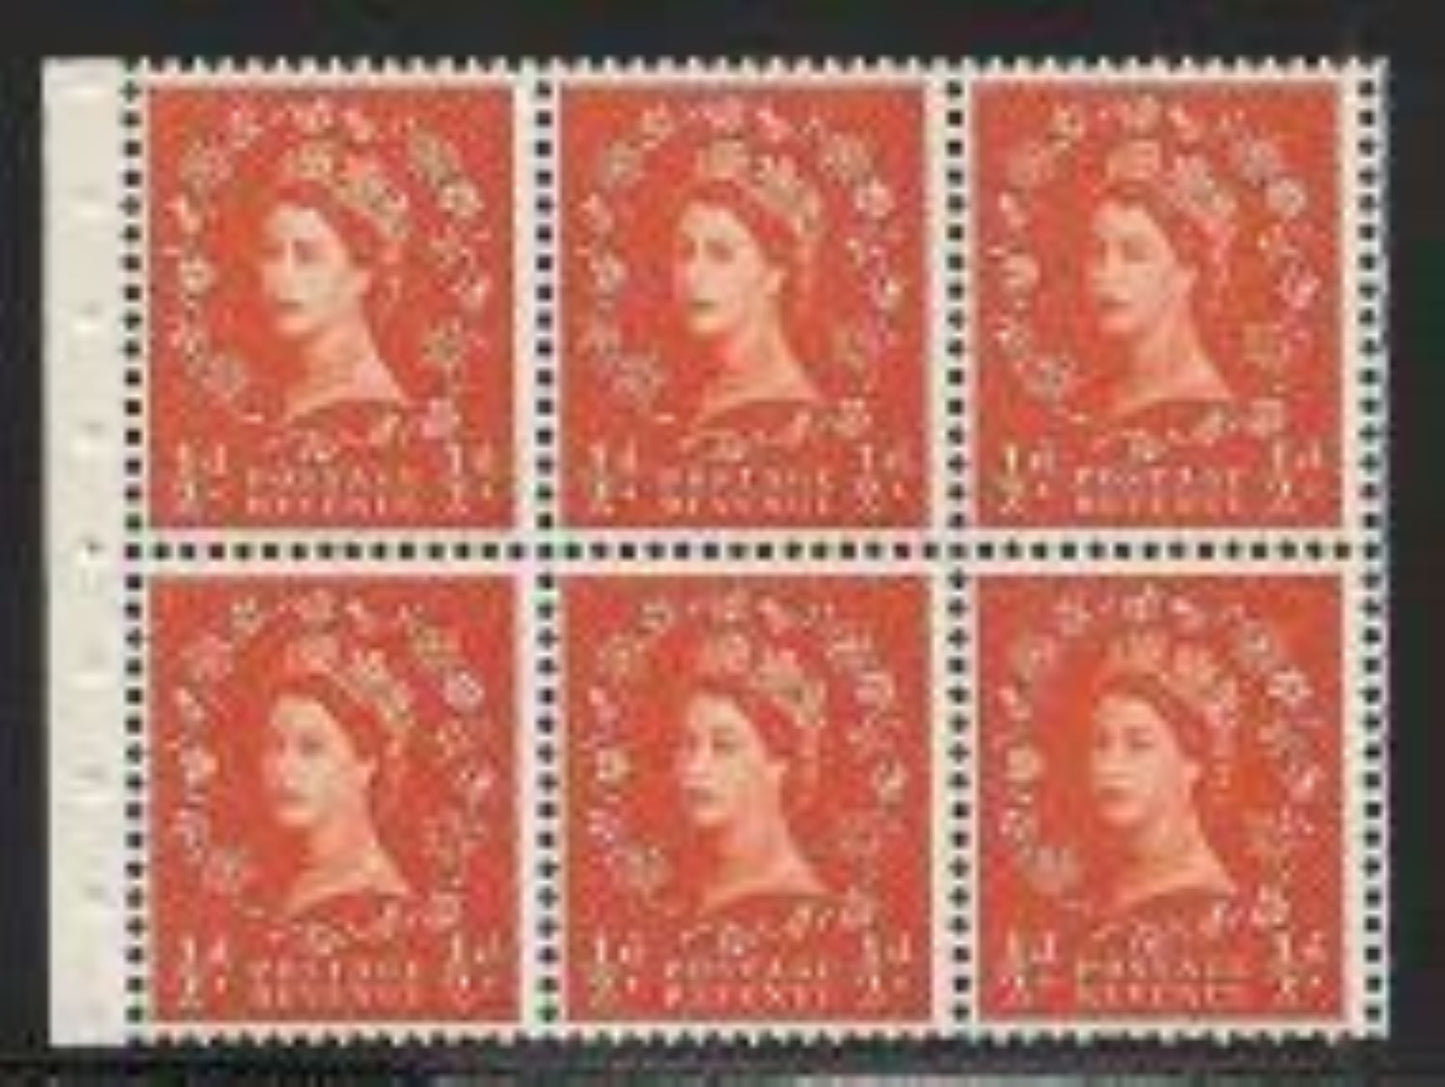 Great Britain SG#M13g 3/- Deep Red & Black Cover 1959 Wilding Graphite Issue, A Complete Counter Booklet With Inverted Multiple St. Edward's Crown Watermark, Panes of 6, Type B GPO Cypher, August 1959